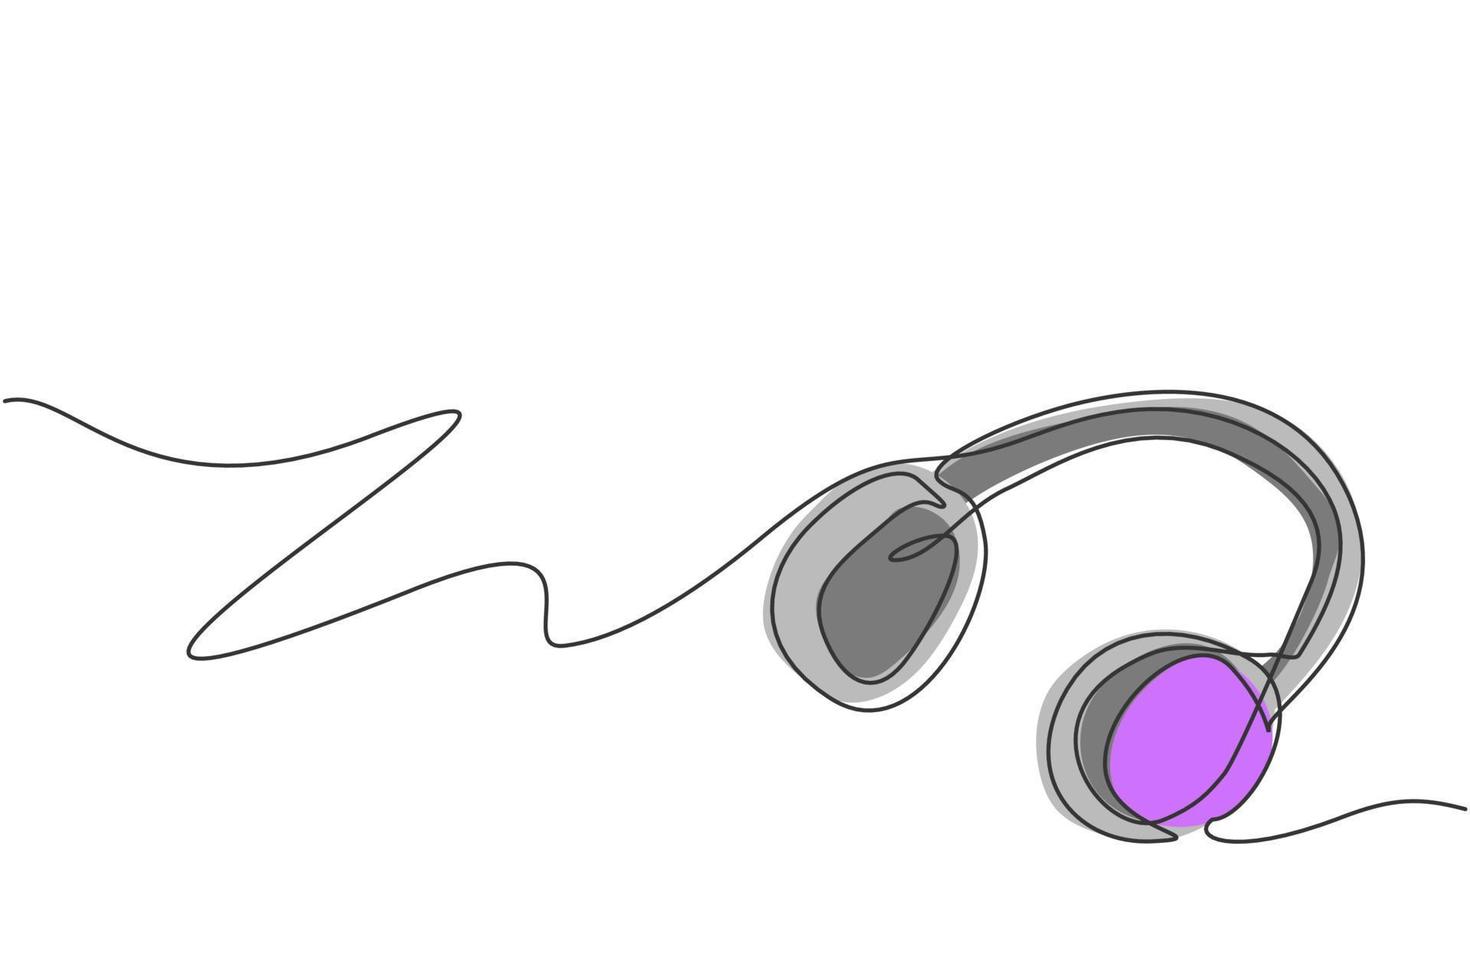 One continuous line drawing of retro headphone for listening music. Musical equipment accessory gadget concept. Trendy single line draw design vector graphic illustration